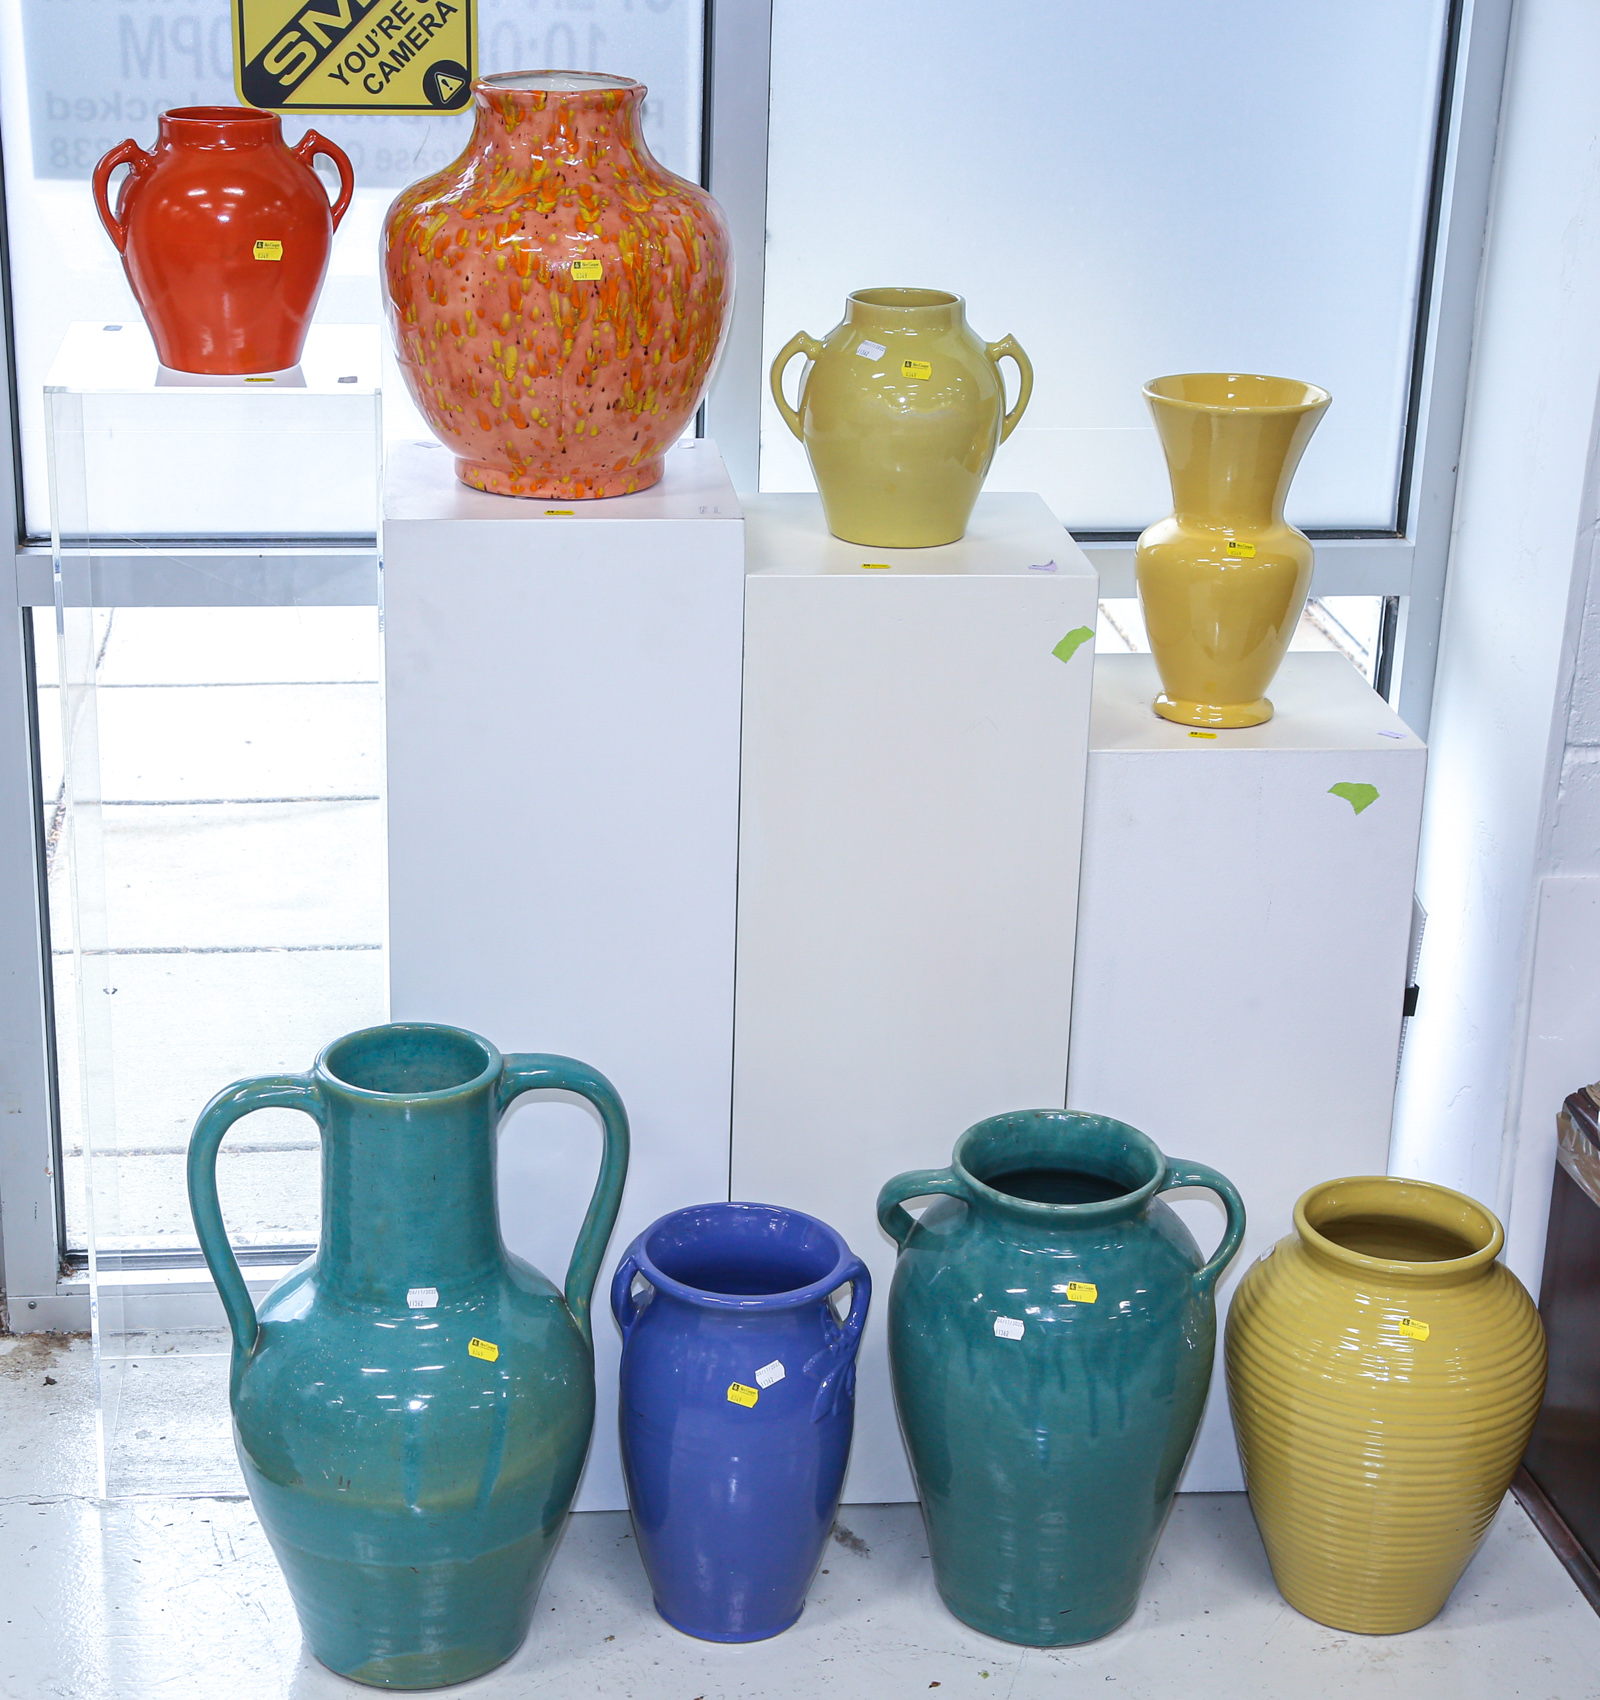 EIGHT COLORFUL POTTERY VASES 8 1/2 to